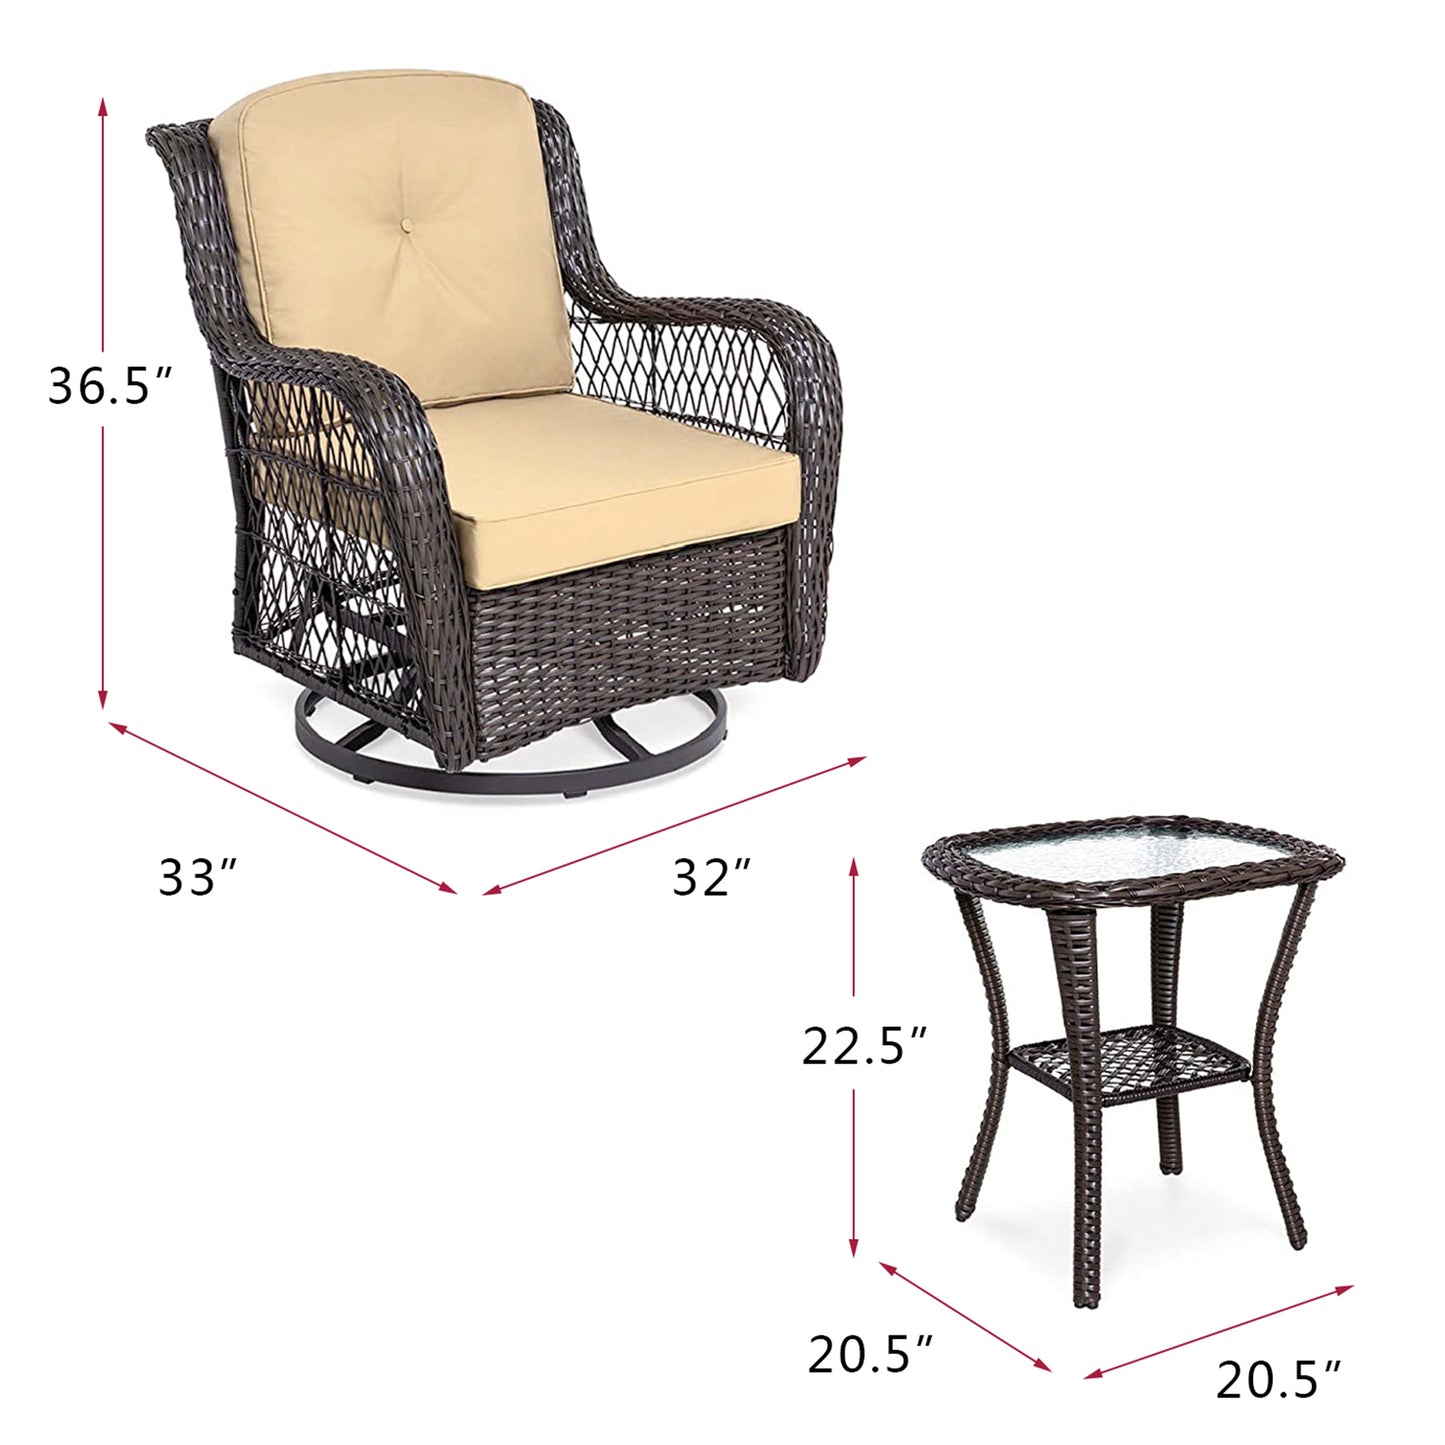 Outdoor Bistro Set 3 Pieces, Outdoor Resin Wicker Swivel Rocker Patio Chair, 360-Degree Swivel Rocking Chairs and Tempered Glass Top Side Coffee Table, Outdoor Rattan Conversation Sets (Khaki)